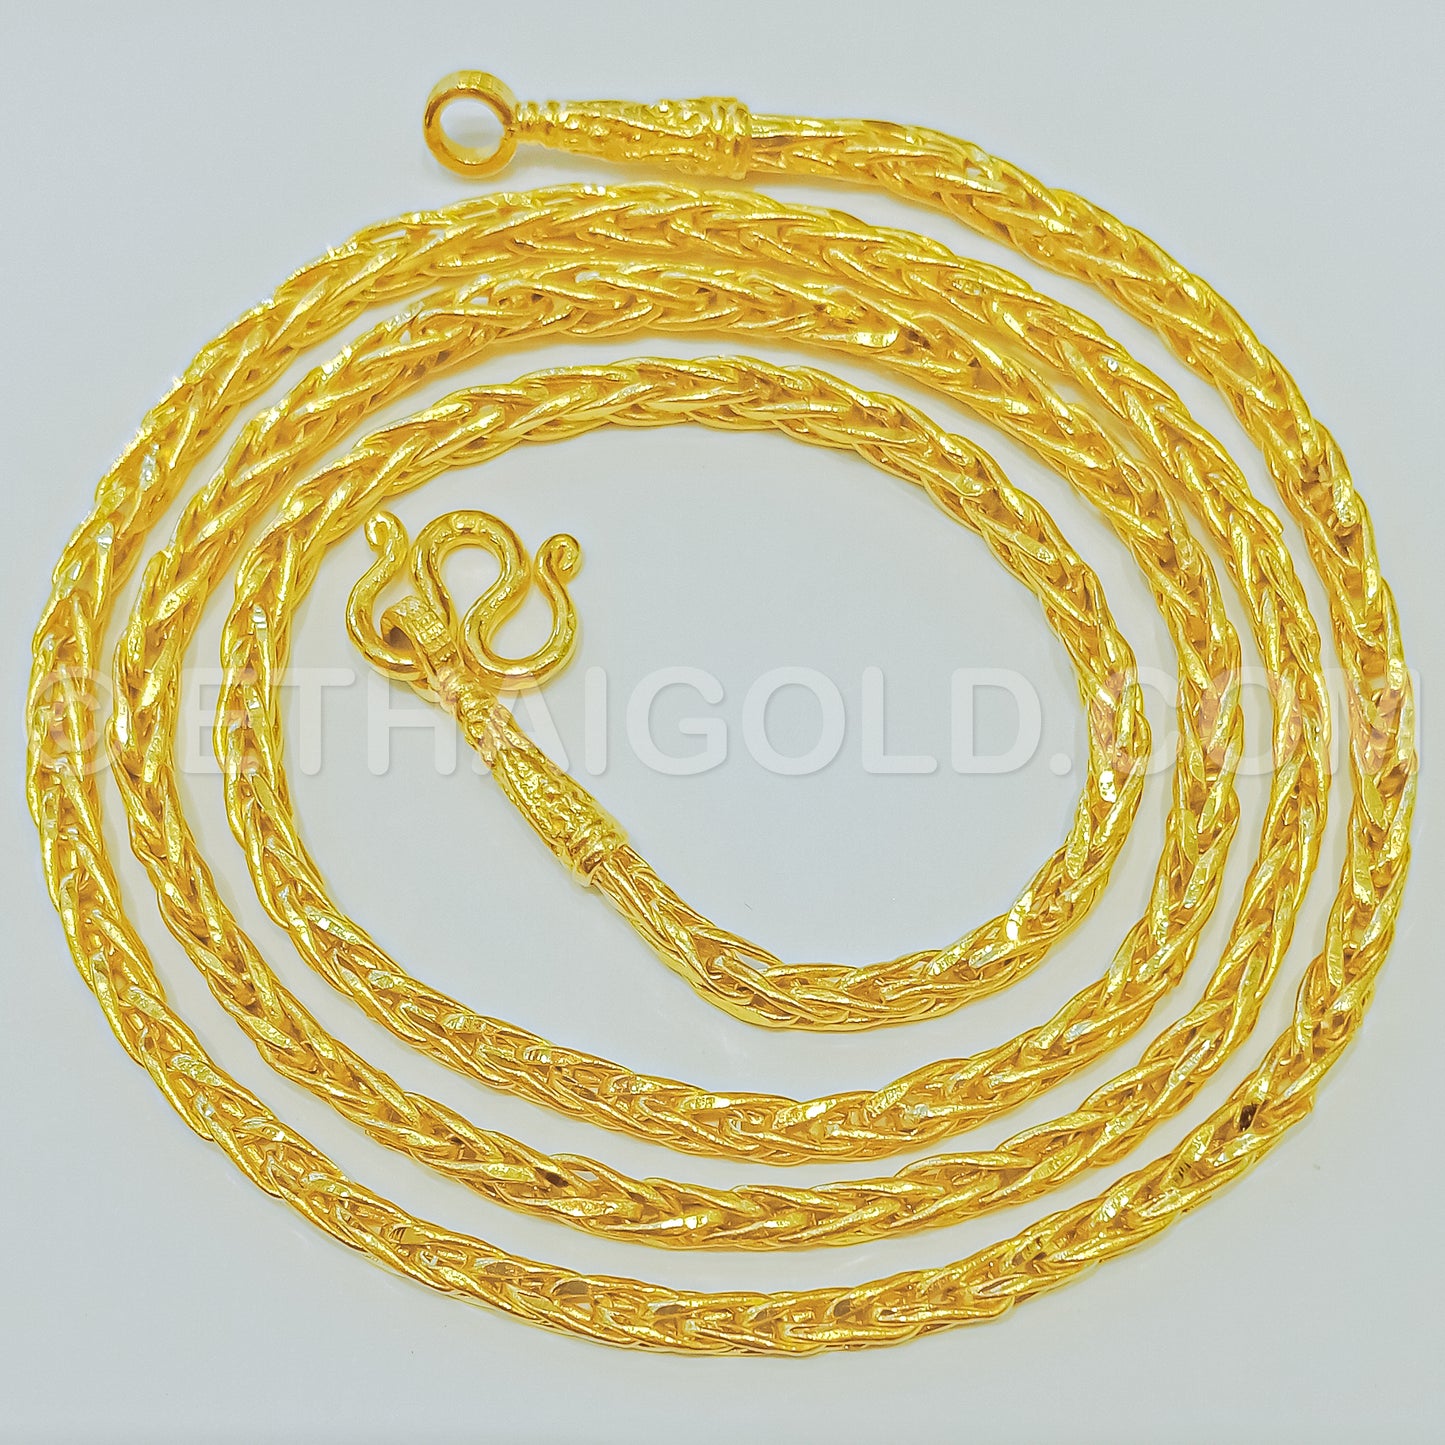 4 BAHT POLISHED DIAMOND-CUT HOLLOW SQUARE WHEAT CHAIN NECKLACE IN 23K GOLD (ID: N1404B)